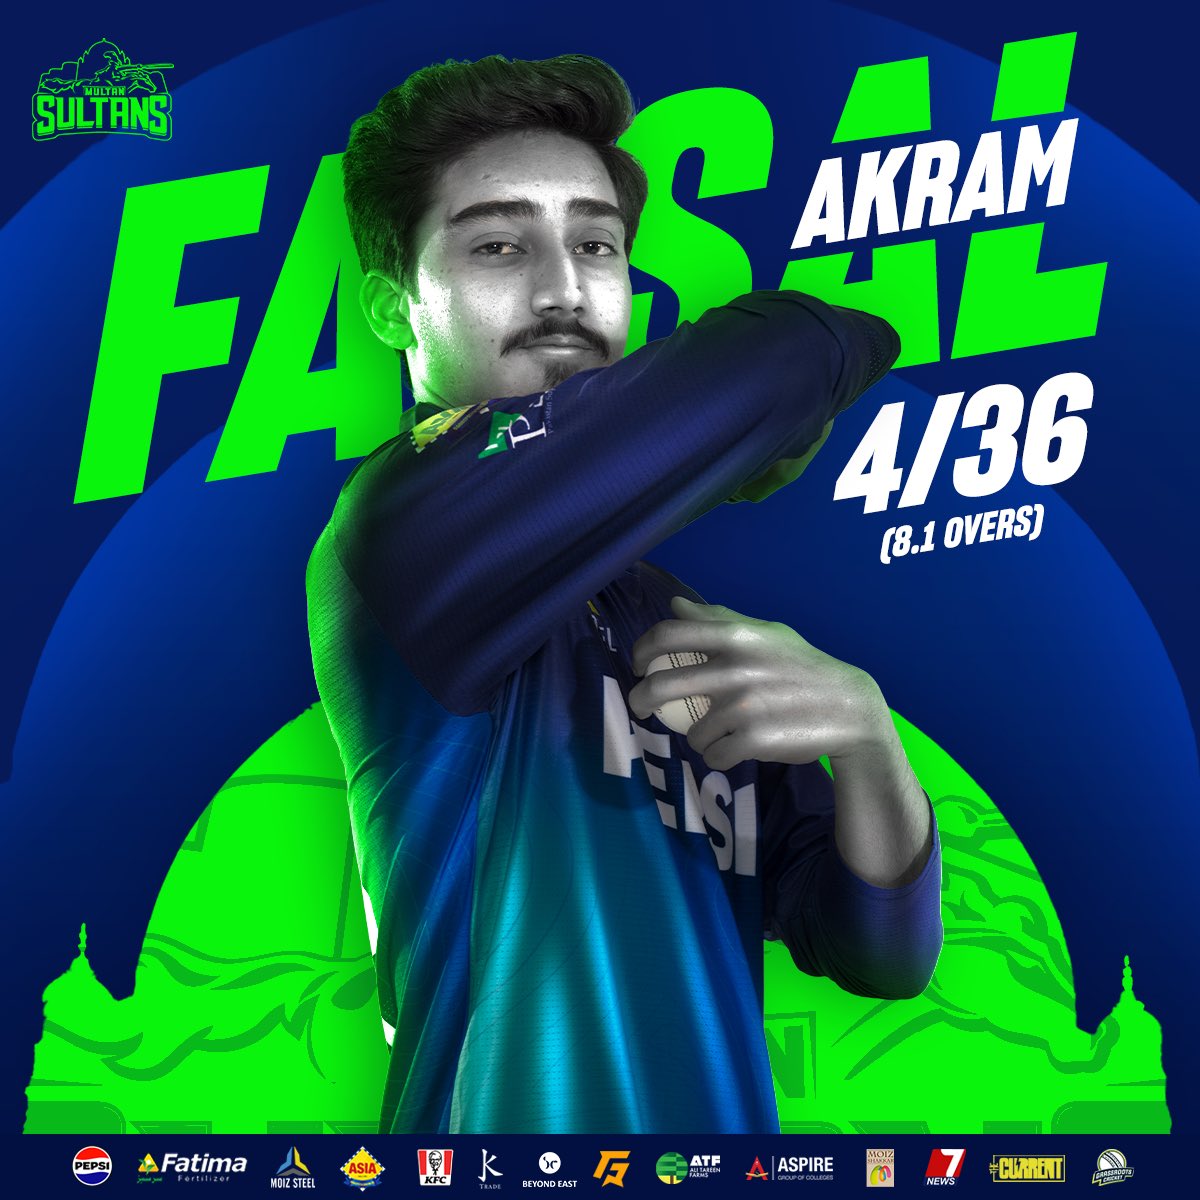 𝑺𝒑𝒊𝒏𝒏𝒊𝒏𝒈 𝒊𝒏𝒆𝒔𝒄𝒂𝒑𝒂𝒃𝒍𝒆 𝒘𝒆𝒃𝒔 🕸️ A four-wicket haul for @FaisalAkram_ in the President’s Cup that helped his team to a win! ⭐️ #SultanSupremacy | #PresidentsCup